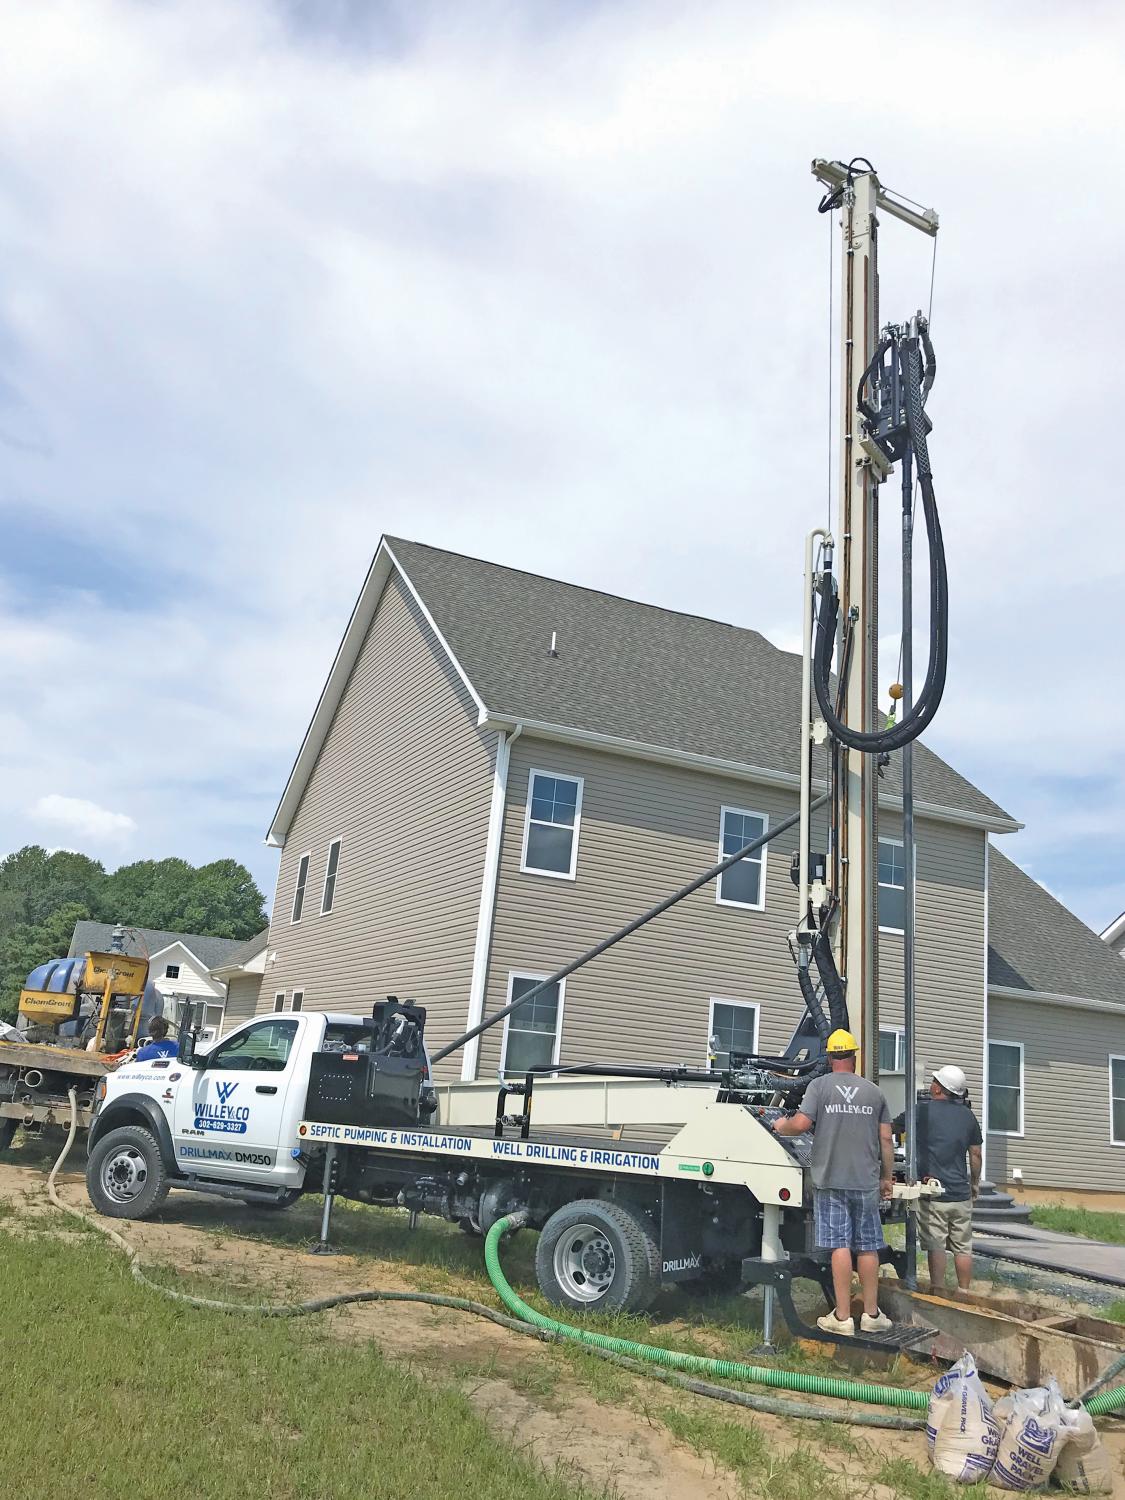 Efficiency of small well drilling machine DM250 permits packing more wells into the same time period while compact size eliminates damage to yards, trees, and landscaping in limited access areas in Delaware.